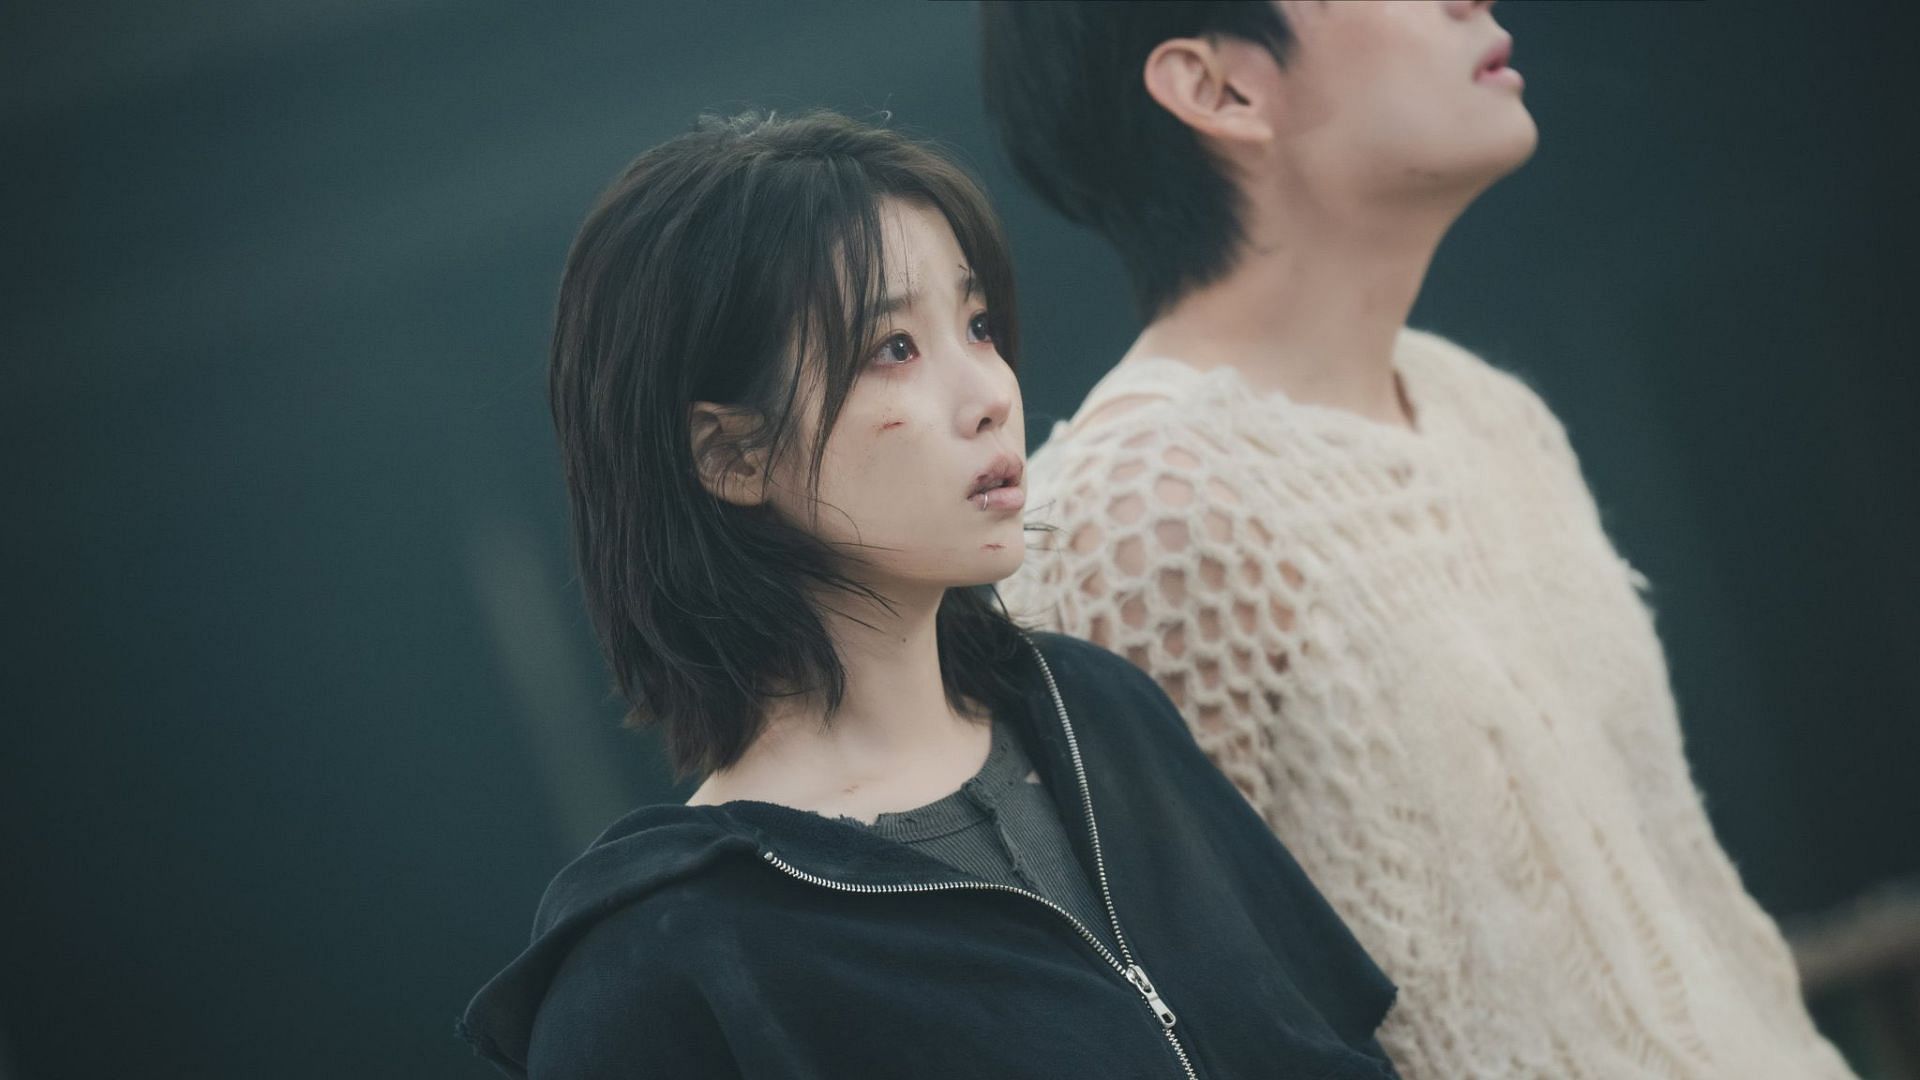 IU reveals about her most memorable moment from the shooting of Love Wins All (Image via MelOn.com)